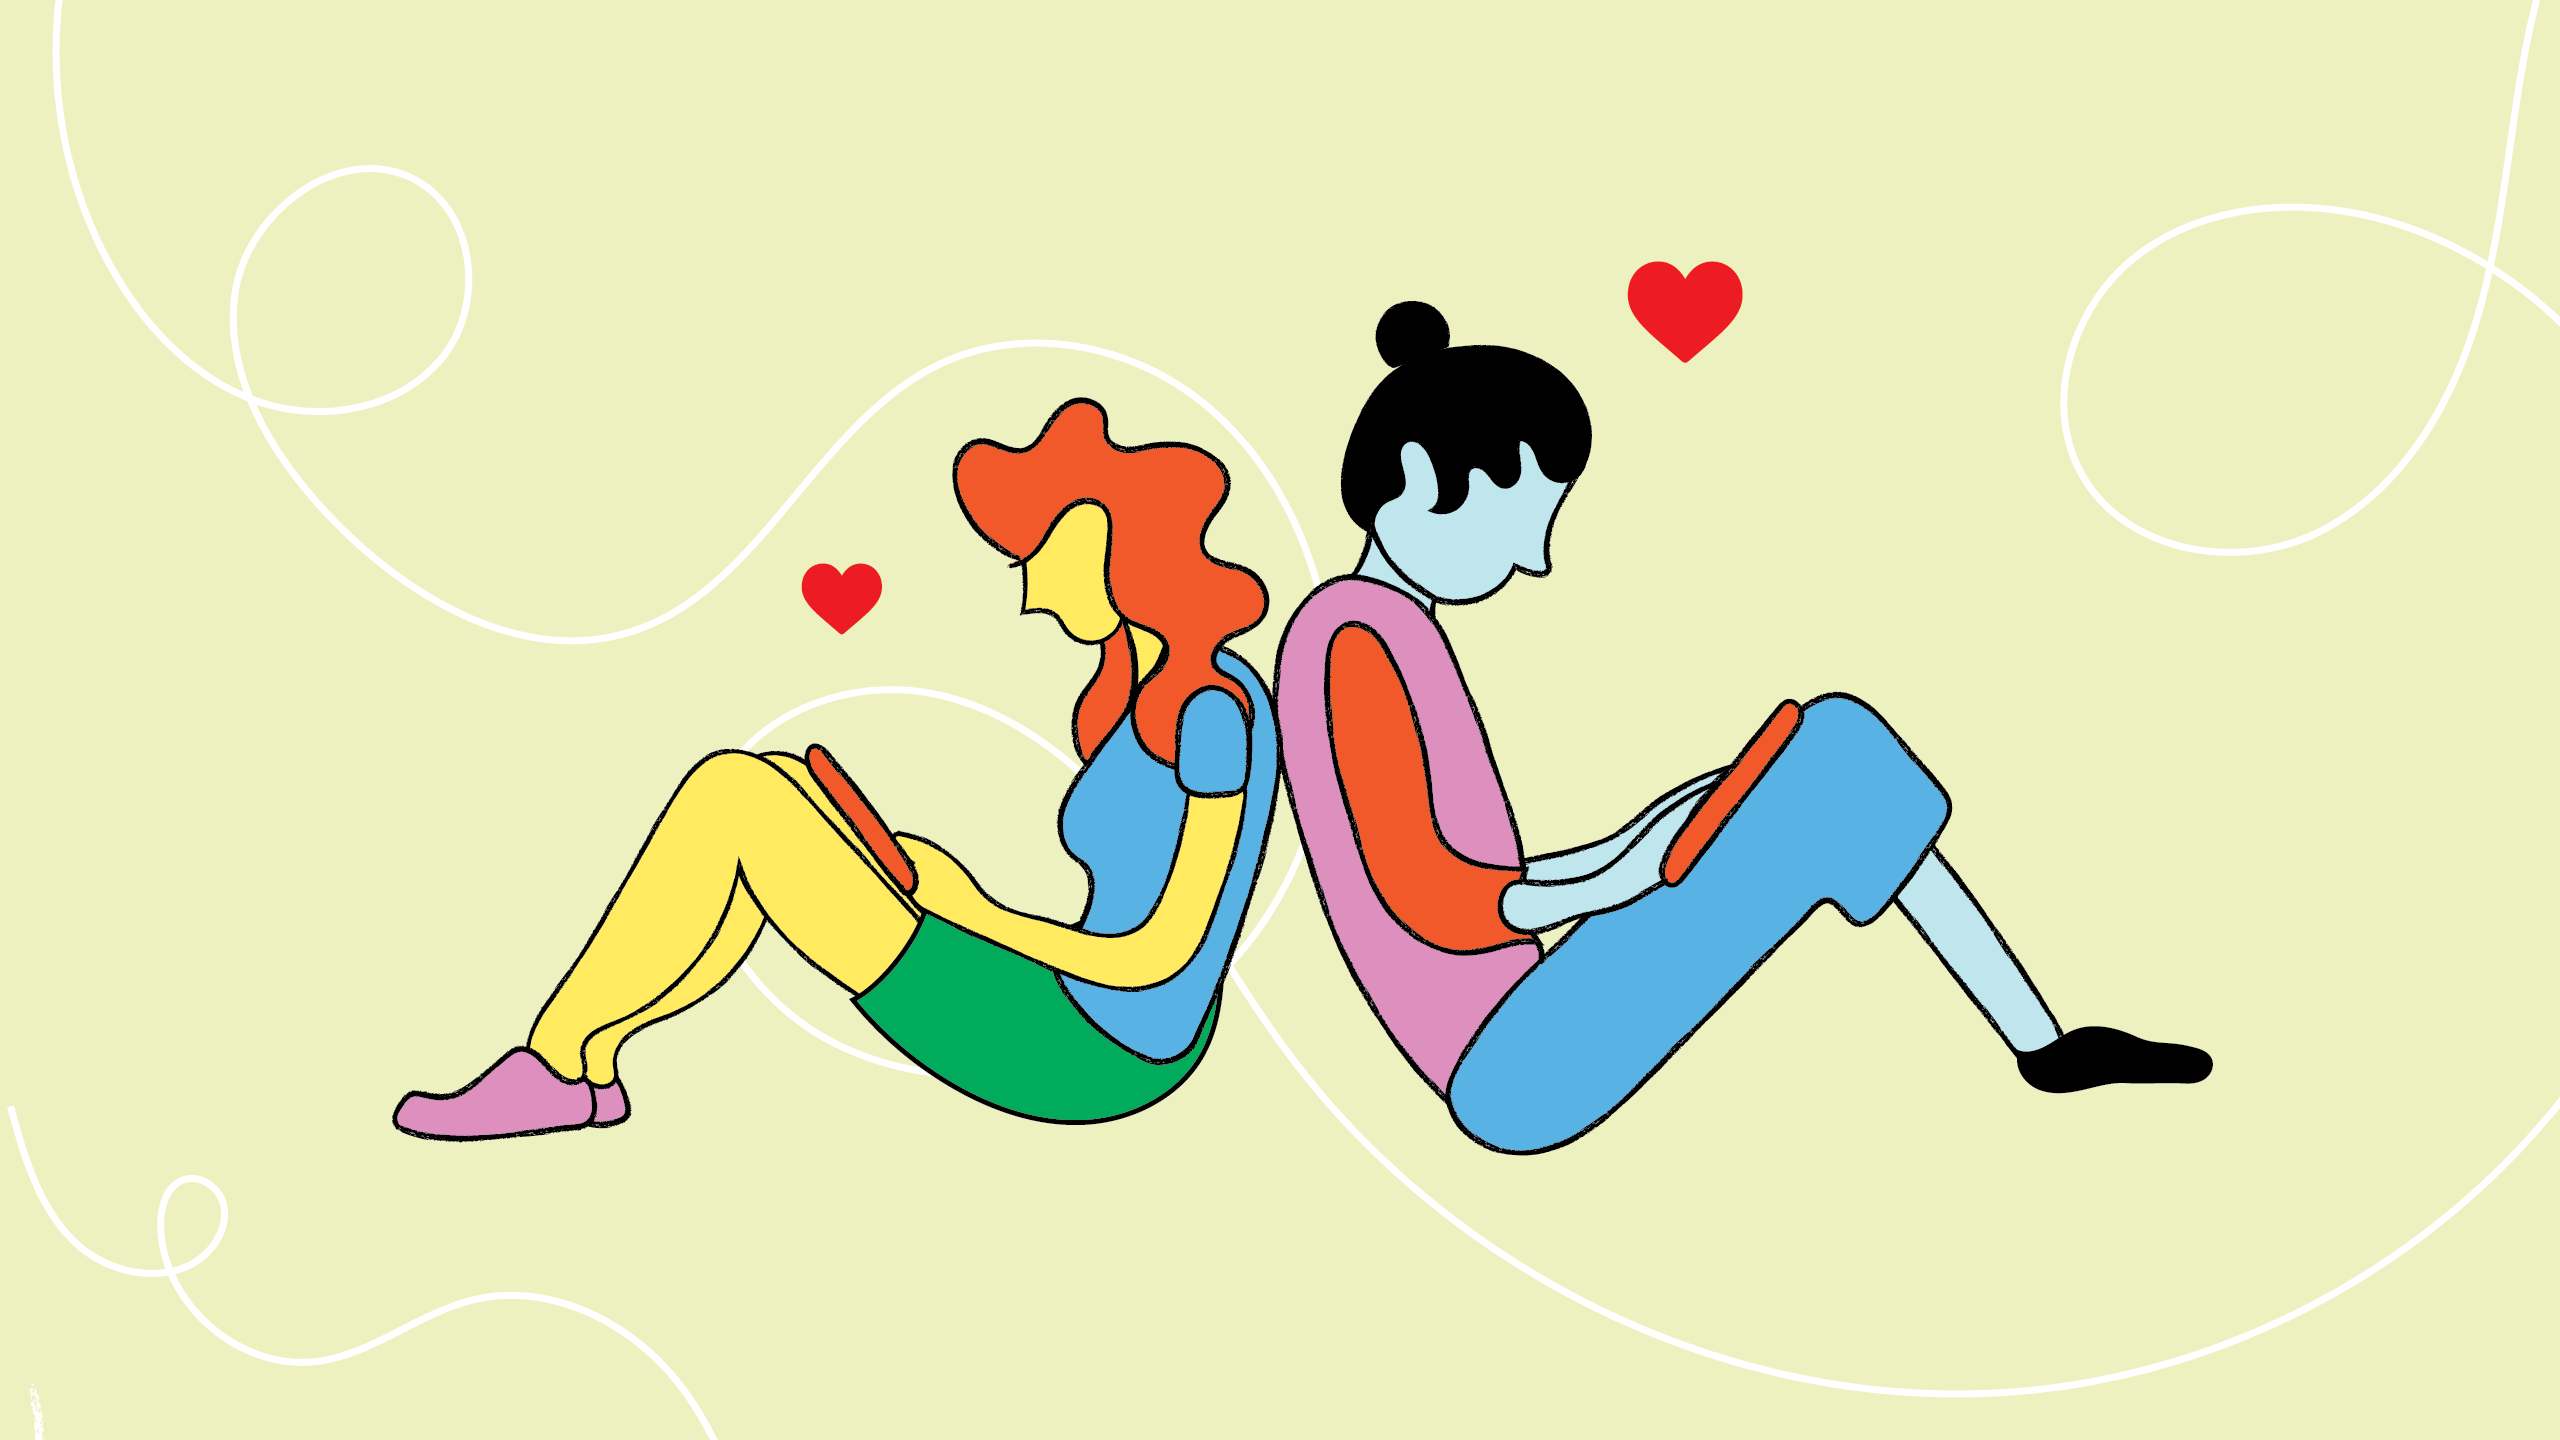 The illustration has a light greenish yellow background with looping white string scattered across. In the middle are two people sitting back to back with phones propped up against their knees. The person on the left has red curly hair, yellow skin, a blue shirt, green shorts, and pink shoes. The person on the right is slightly taller with black hair that's in a bun, light blue skin, a pink full sleeve top with orange sleeces, blue pants, and black shoes. Both people have small red hearts above their heads.